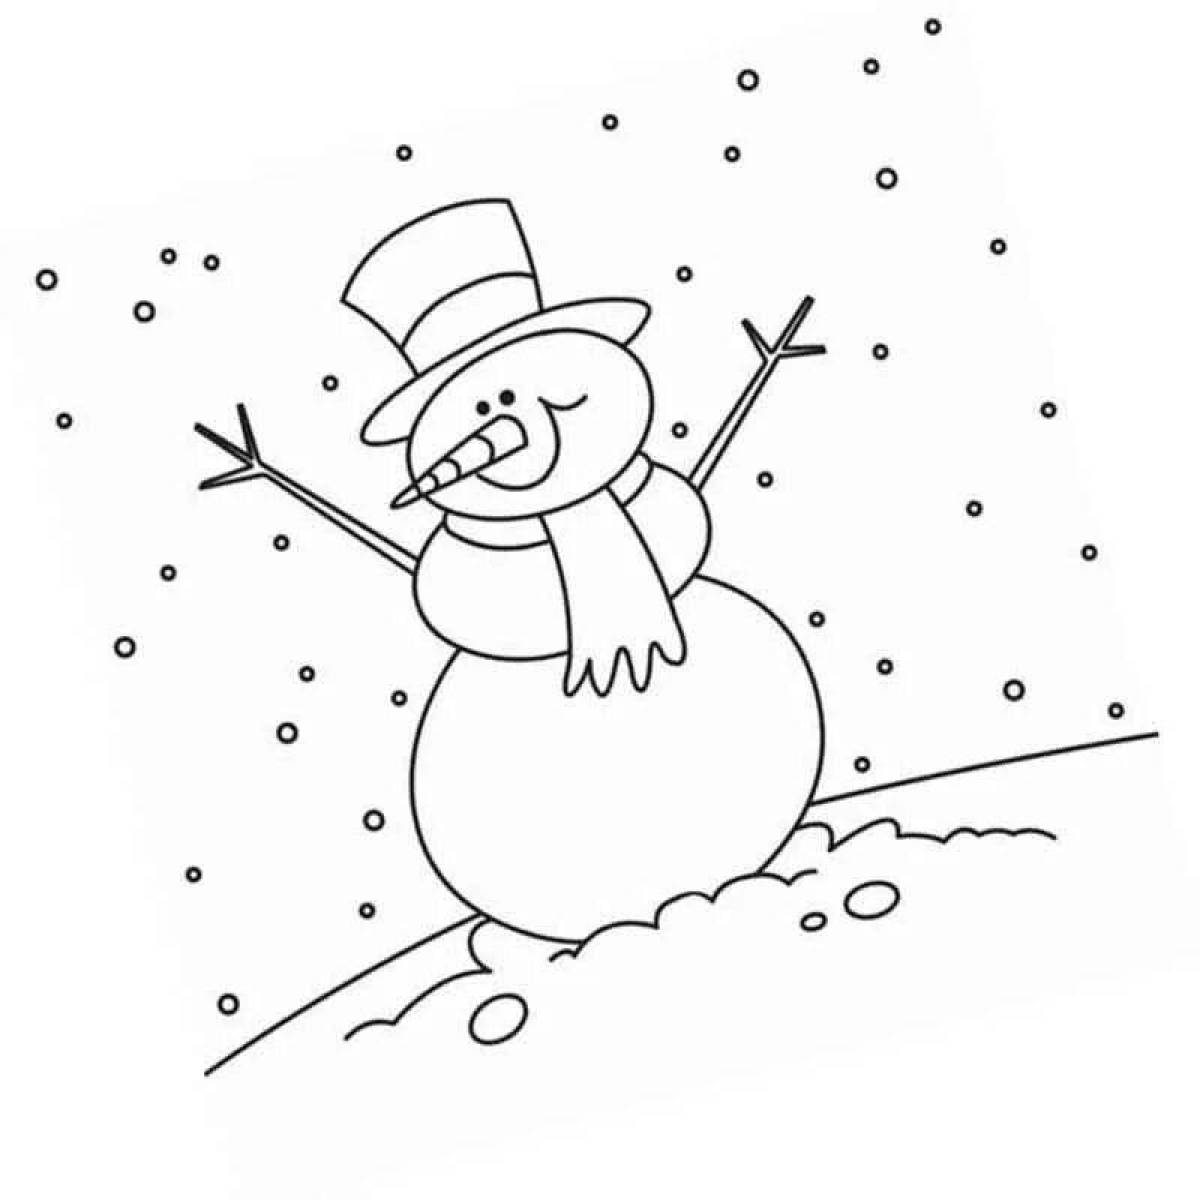 Sparkling snowman coloring book for kids 6-7 years old